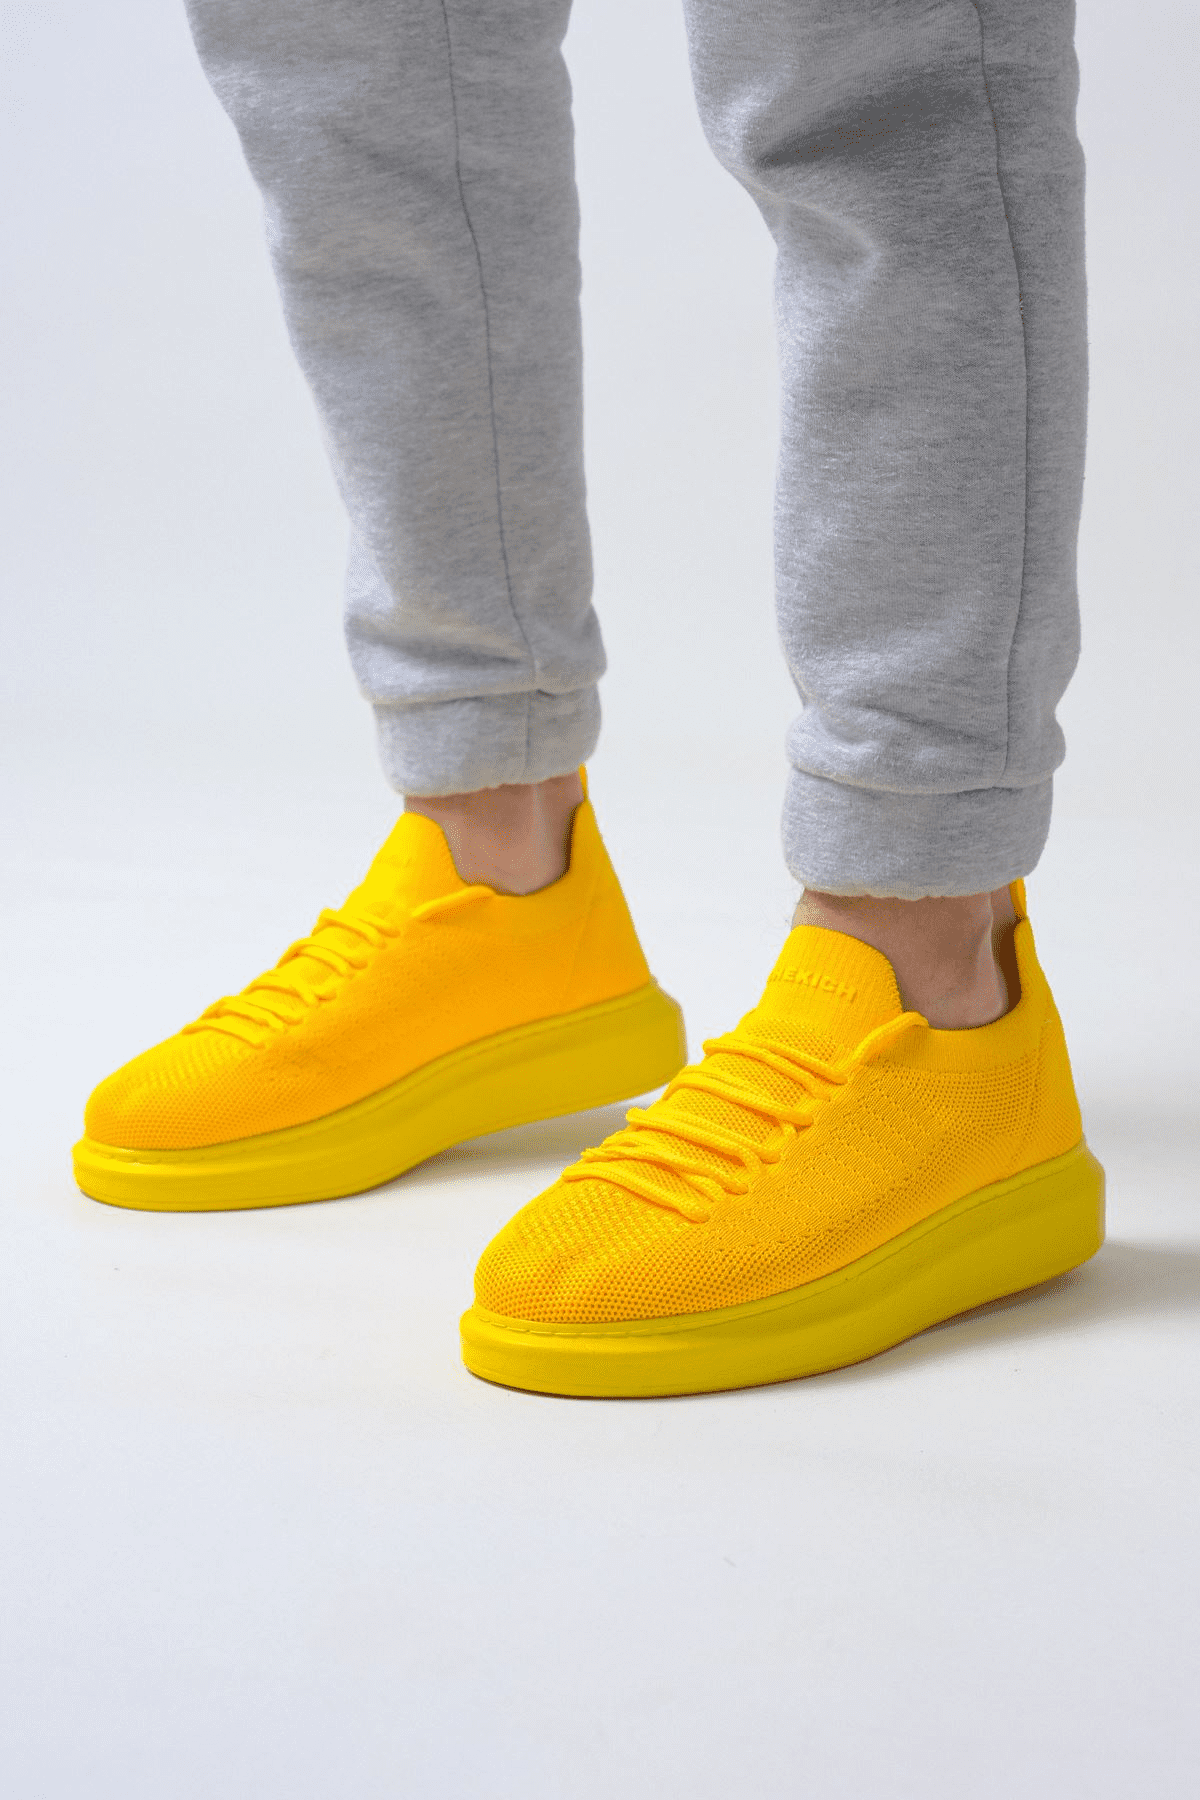 Chekich Casual Men's Shoes Yellow Color Lace-Up Knitting Fabric Material High White Sole Summer Spring Season Sneakers CH307 BT